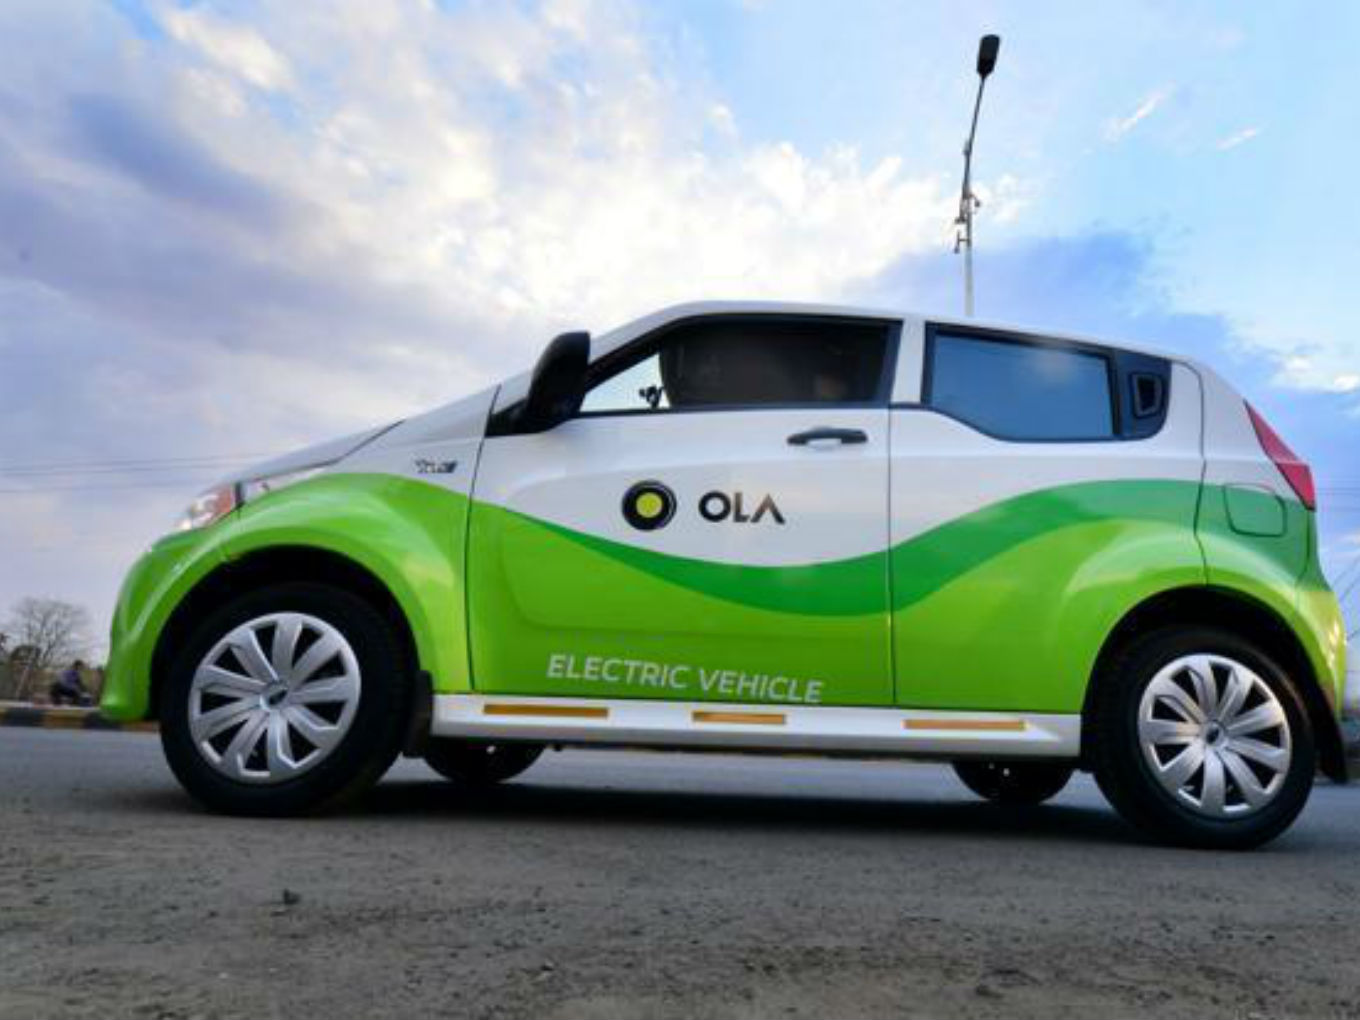 Hyundai To Deploy Electric Cars In Ola’s Fleet By 2021